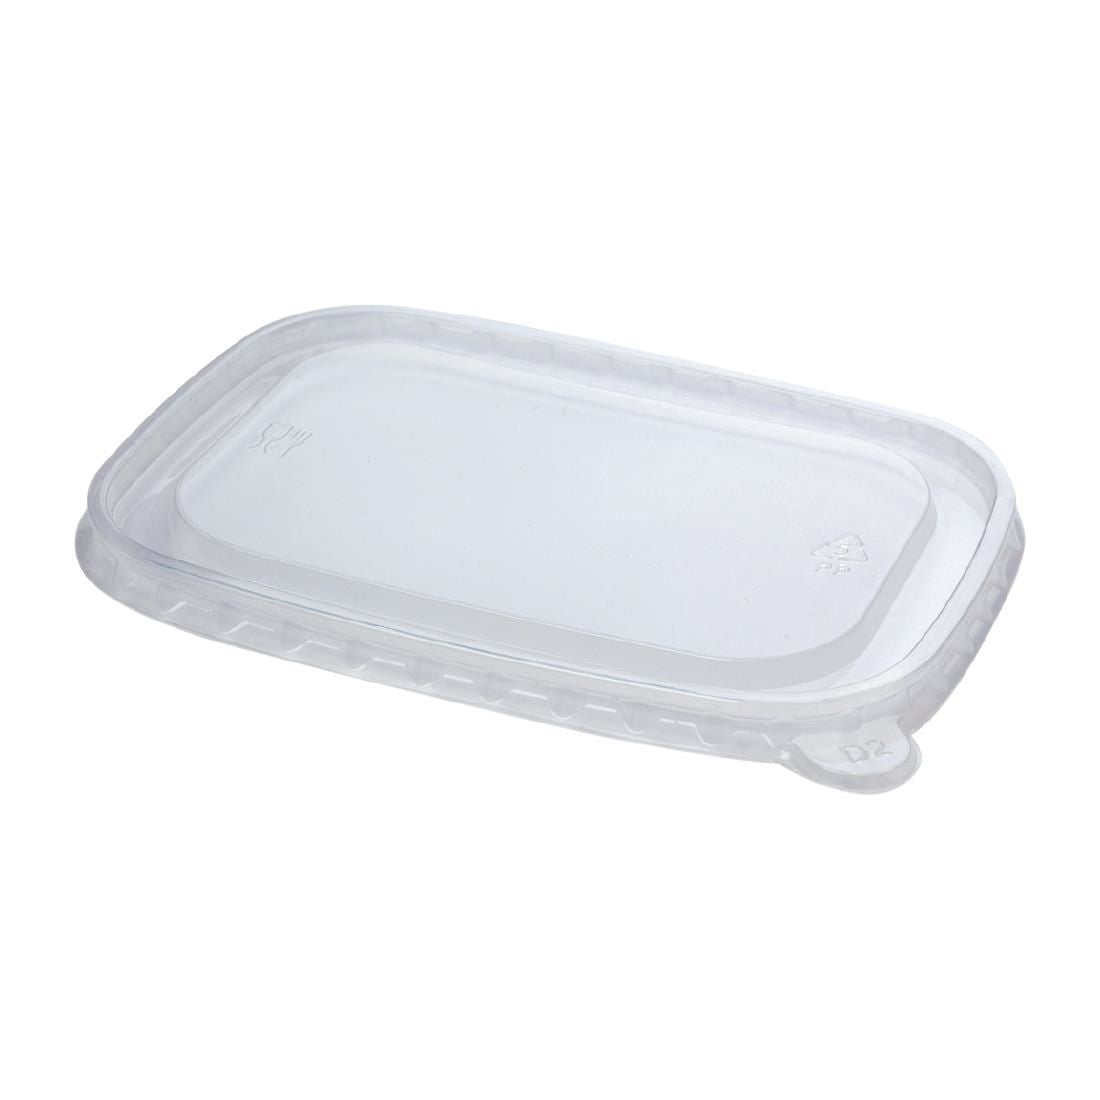 FP455 Colpac Stagione Microwavable Polypropylene Food Box Lids (Pack of 300) JD Catering Equipment Solutions Ltd